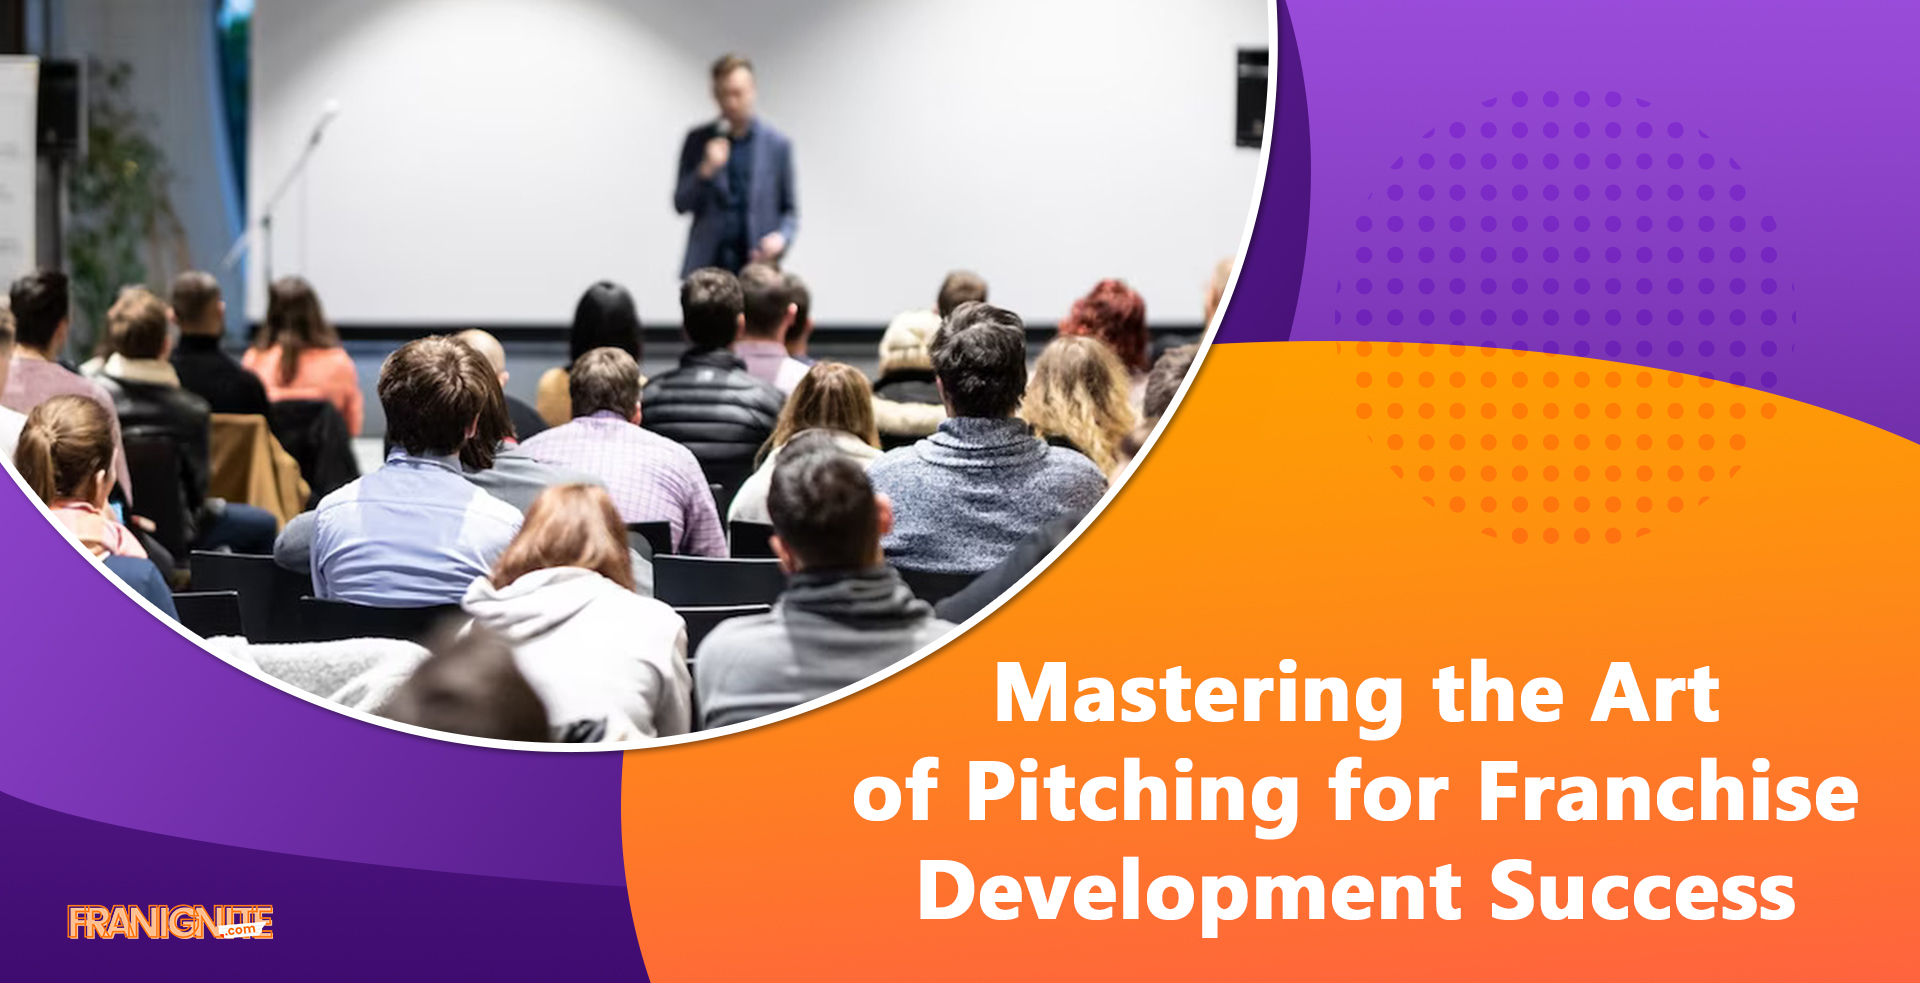 You are currently viewing Mastering the Art of Pitching for Franchise Development Success